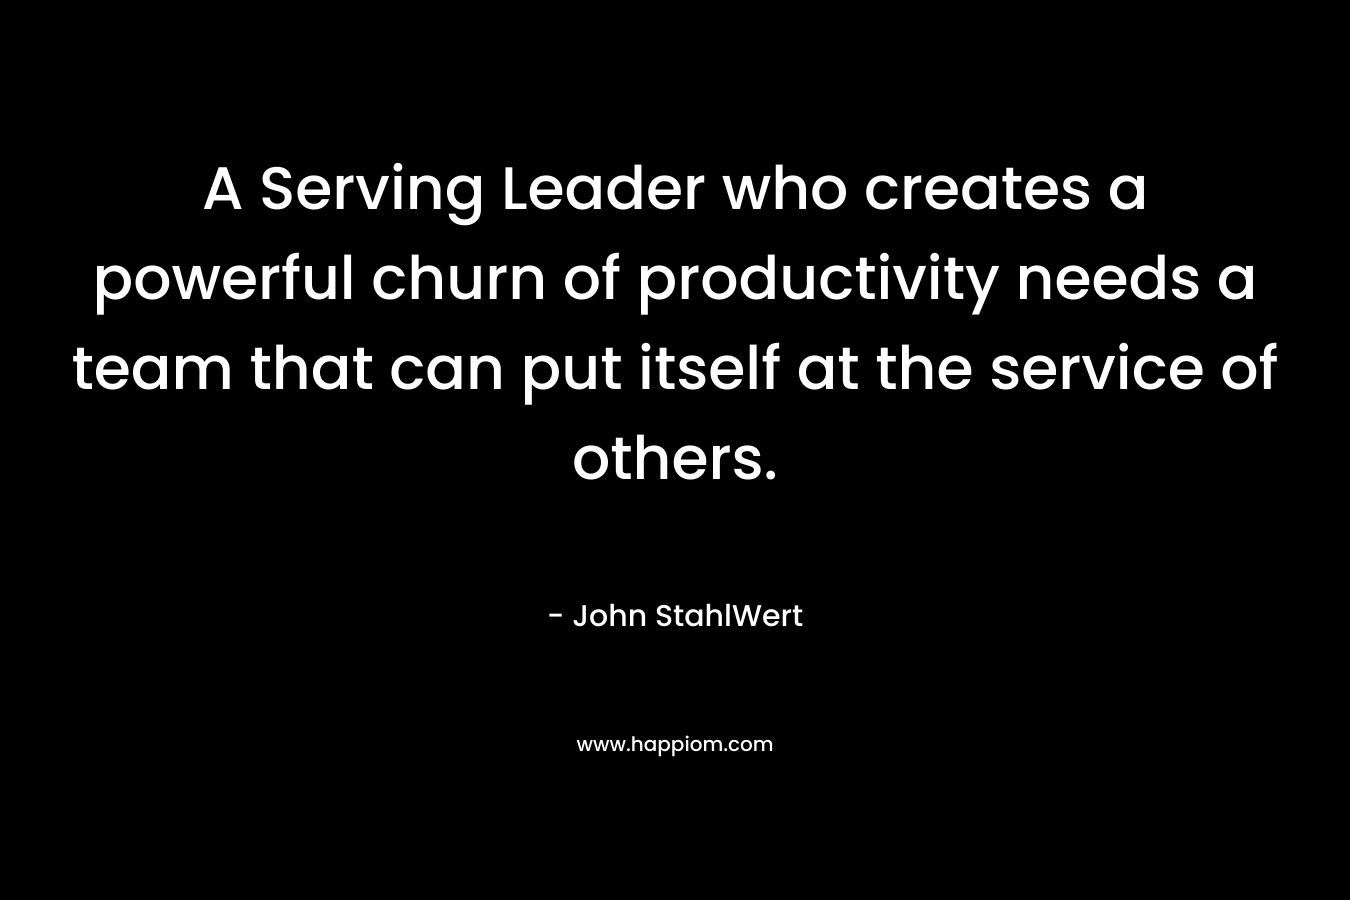 A Serving Leader who creates a powerful churn of productivity needs a team that can put itself at the service of others. – John StahlWert